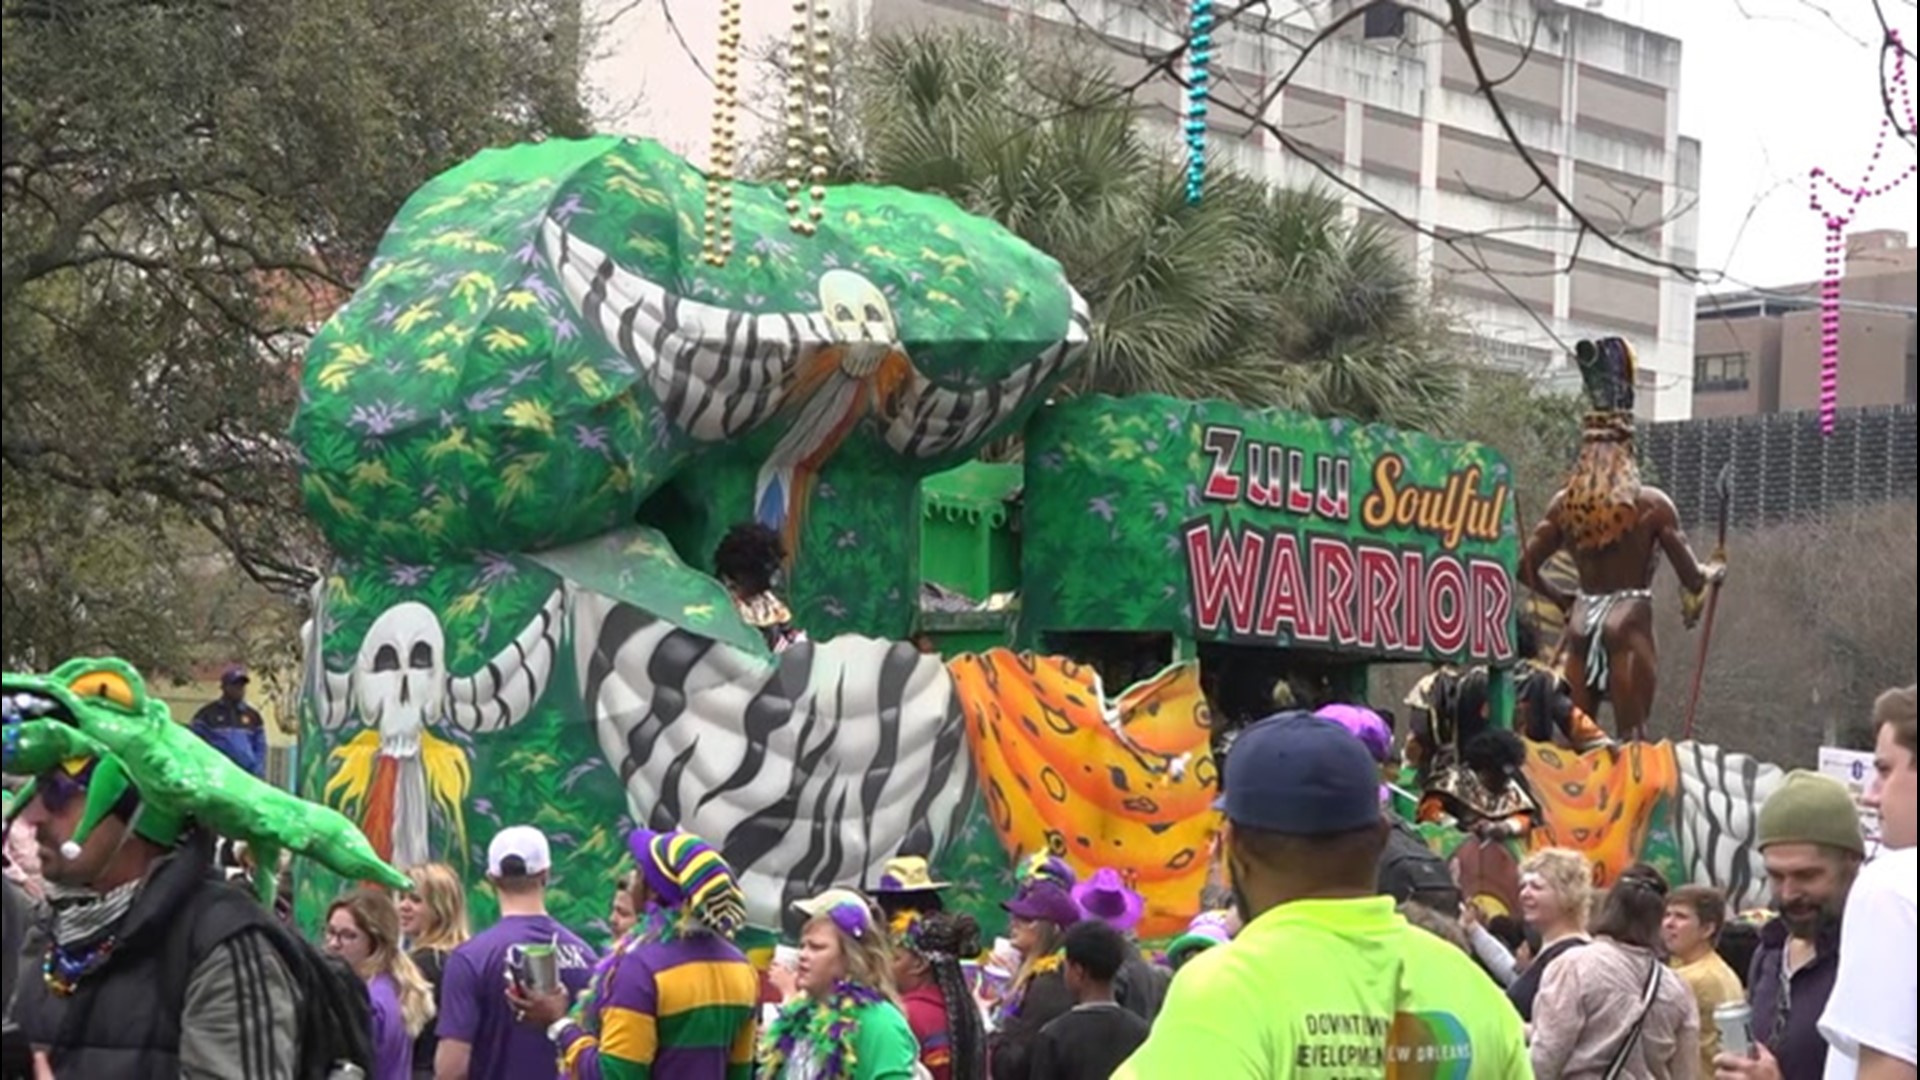 After a wet night that made some nervous, it was just cloudy and cool in New Orleans as thousands celebrate Mardi Gras.